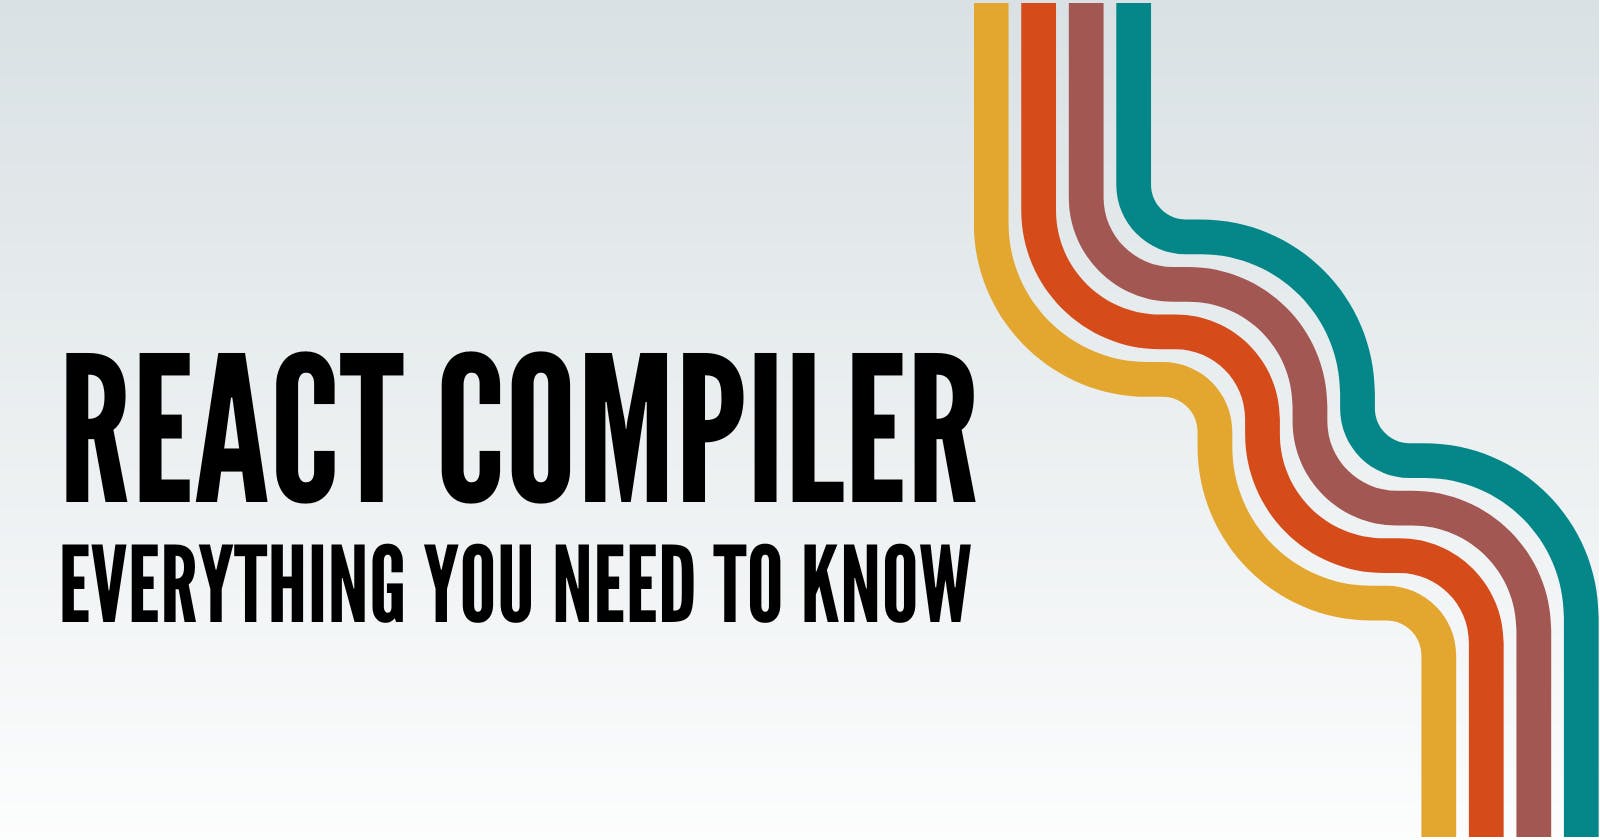 React Compiler: Everything You Need to Know